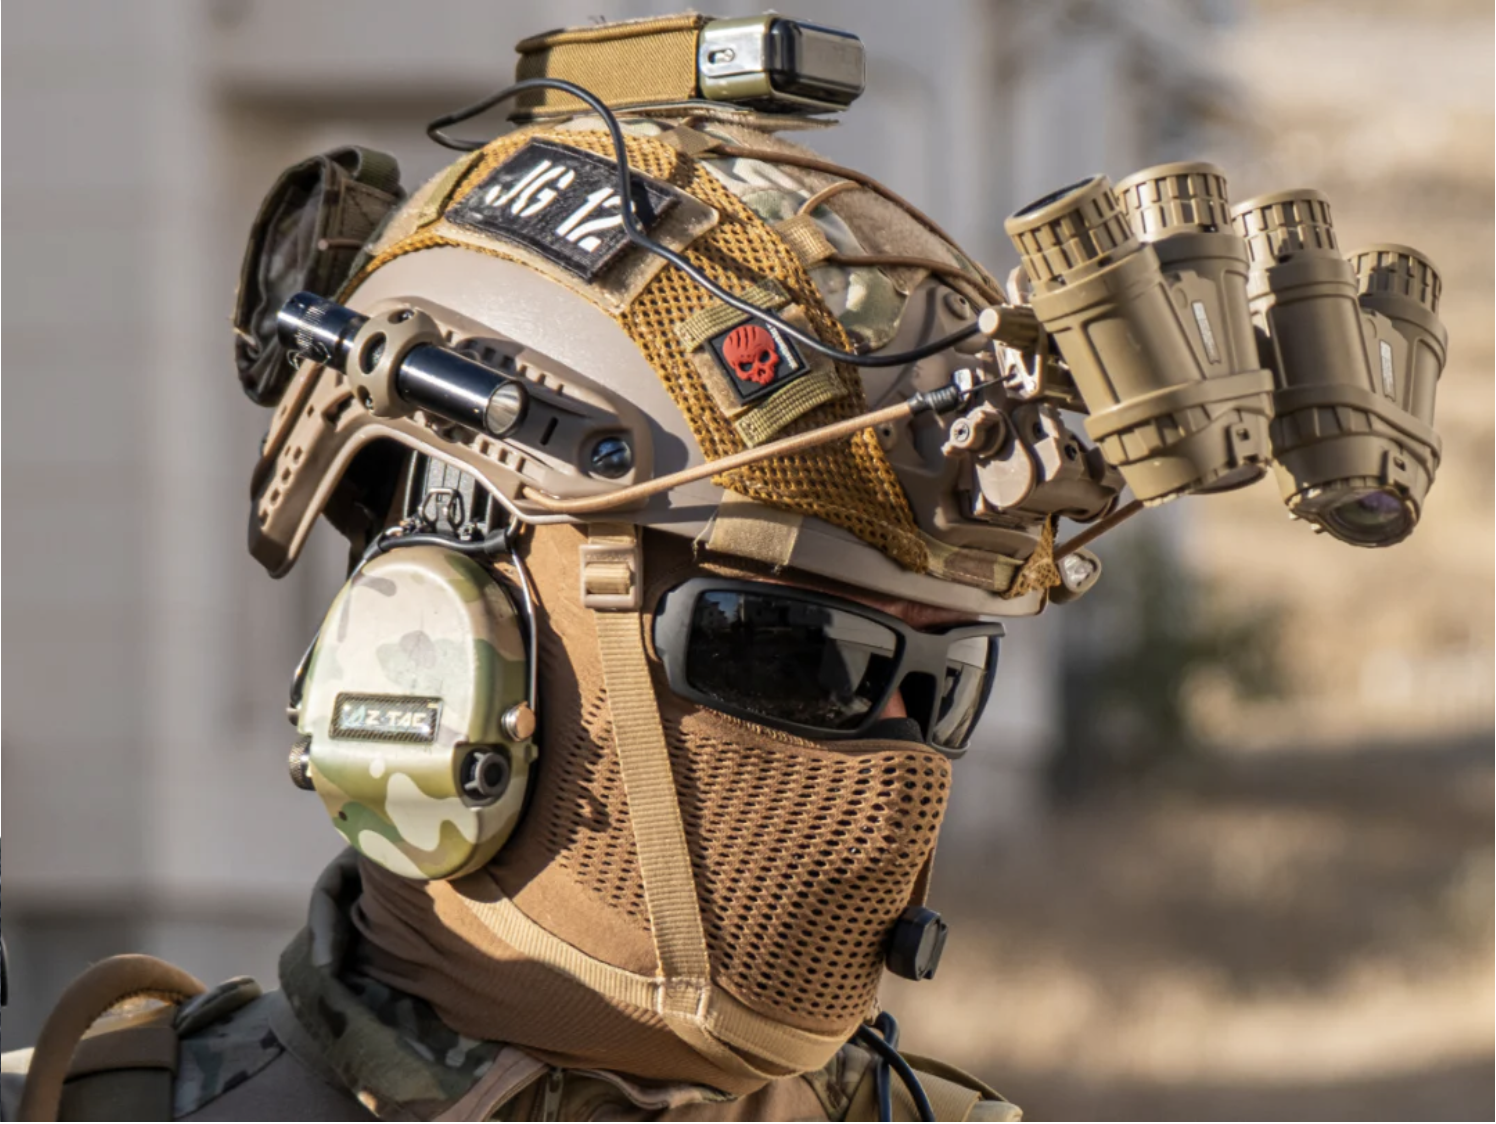 NB-Tactical NB-Tactical GHOST MASK - FORTIS V2 - tactical airsoft gear